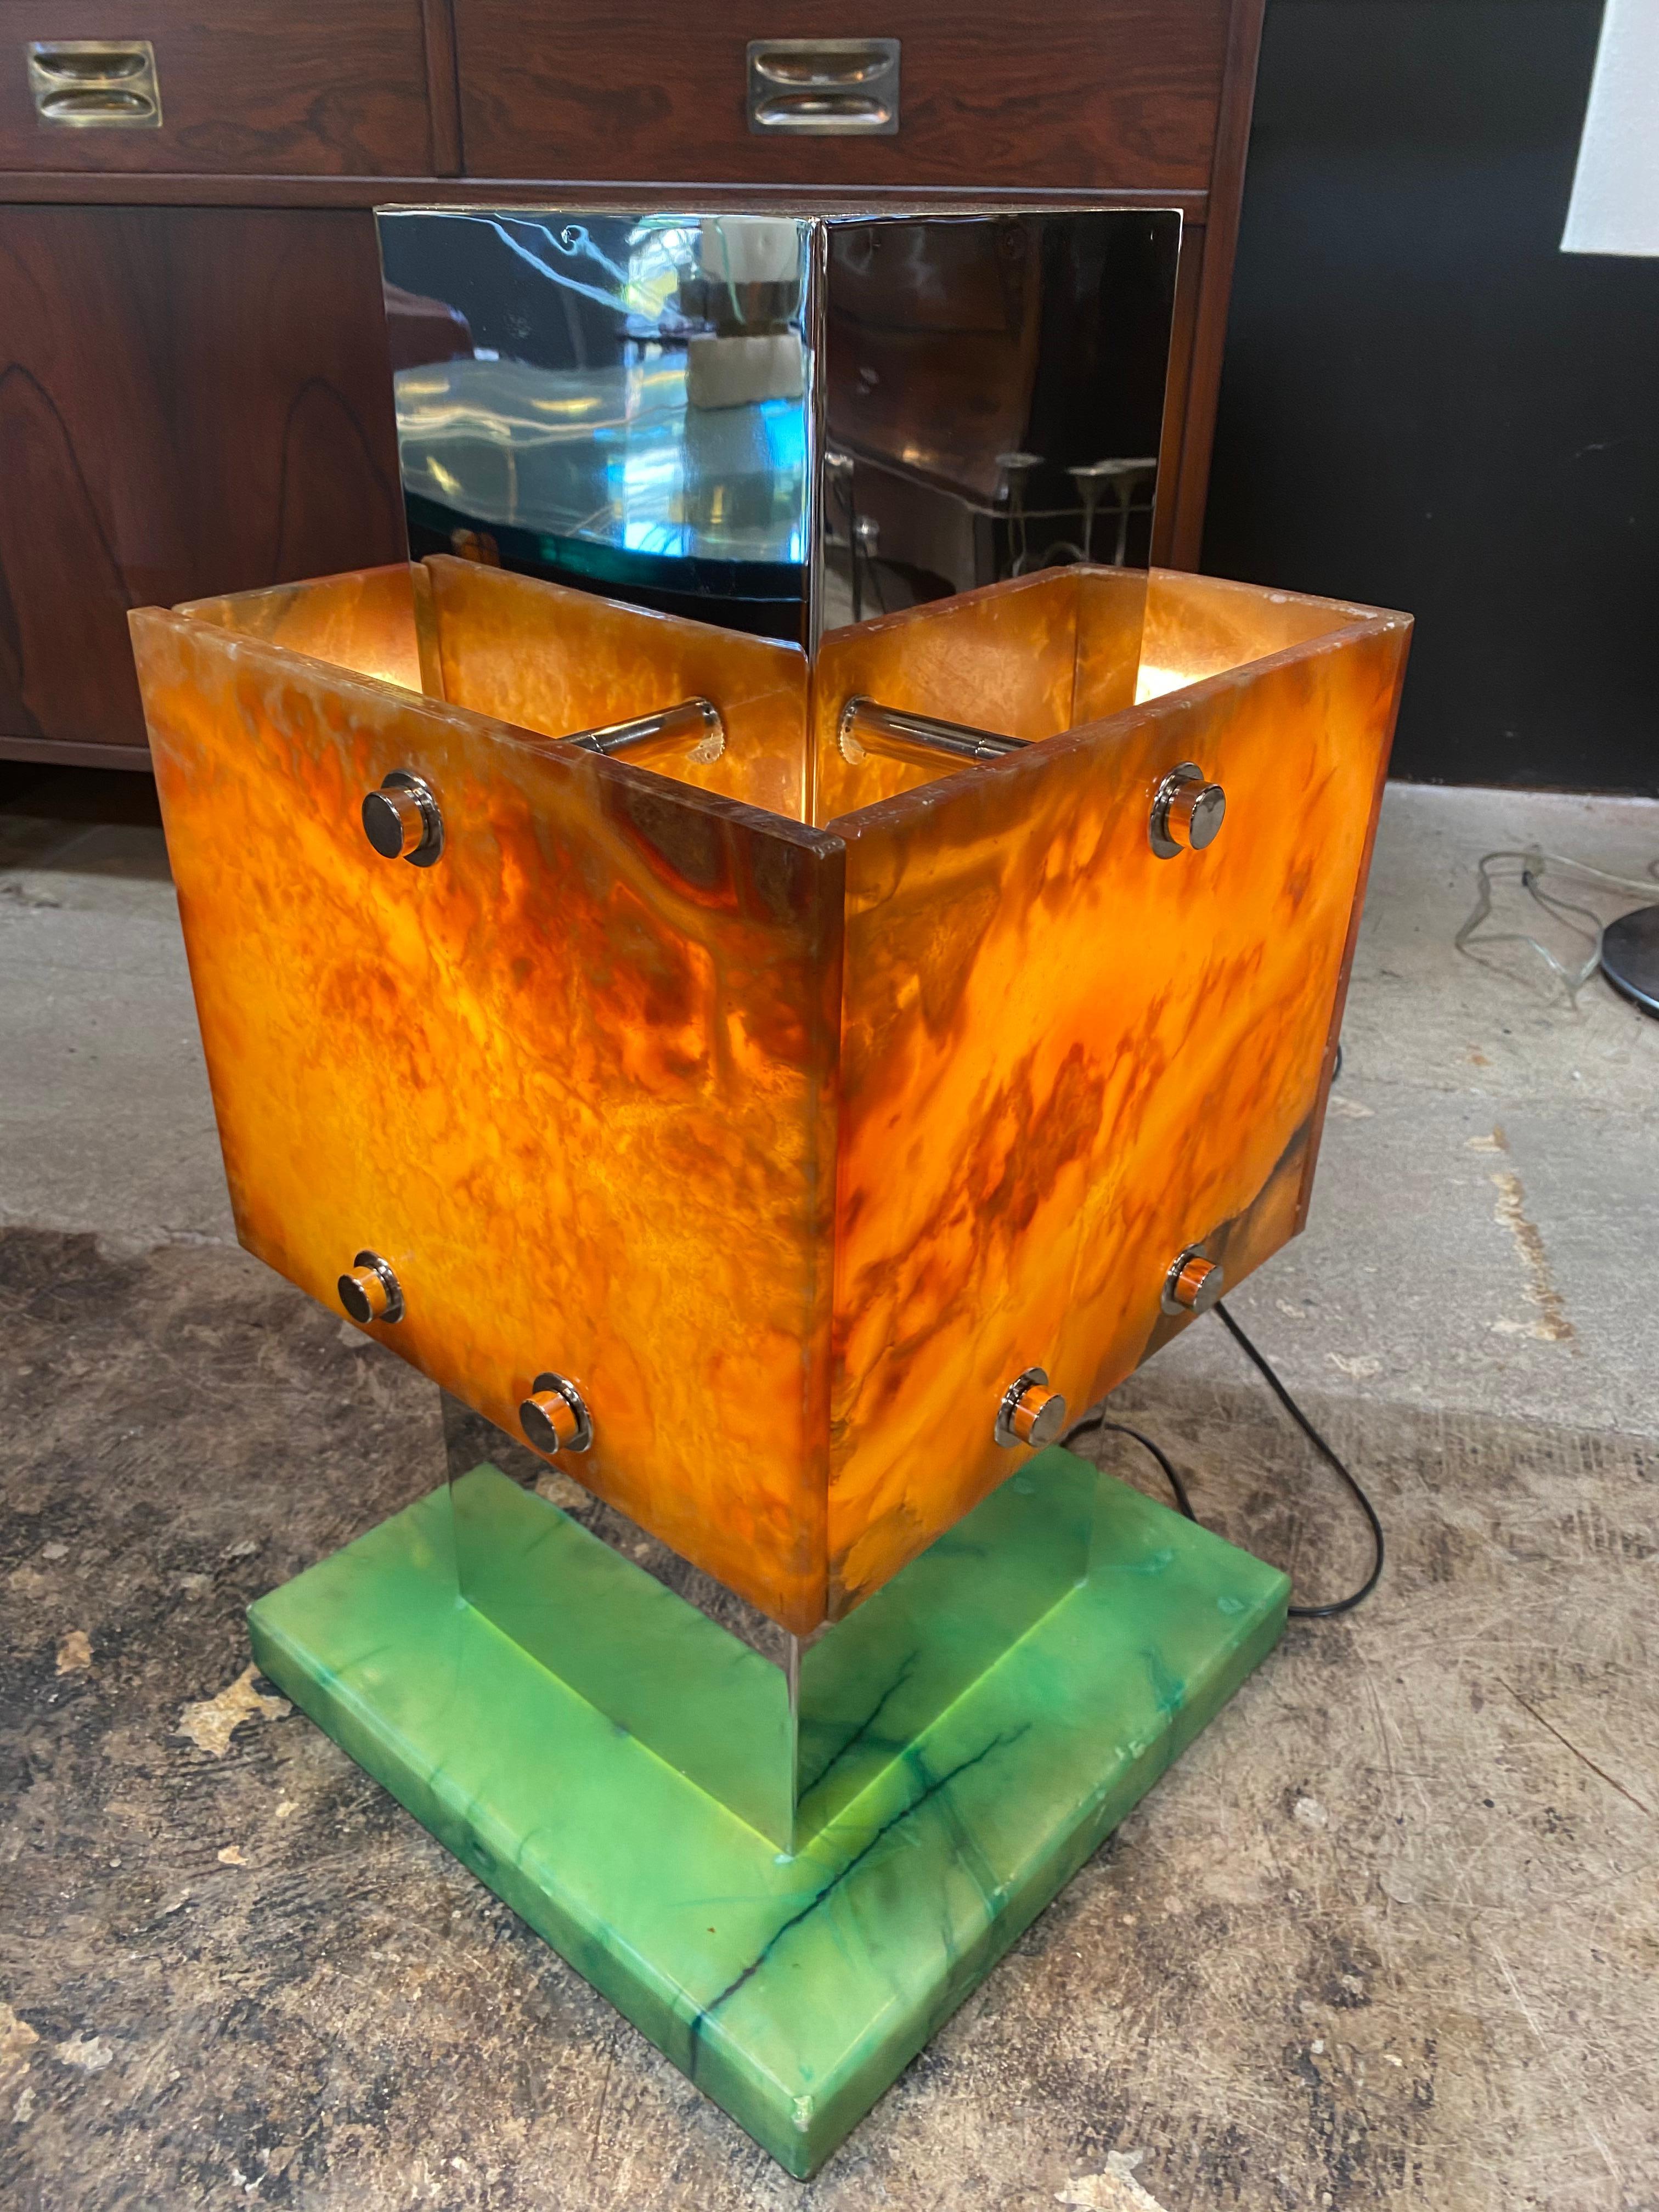 The body of this geometrical lamp is composed of two solids, one chrome and one (the shade) with an amber Lucite finish cut by hand.
The square Lucite base is 13 x 13.